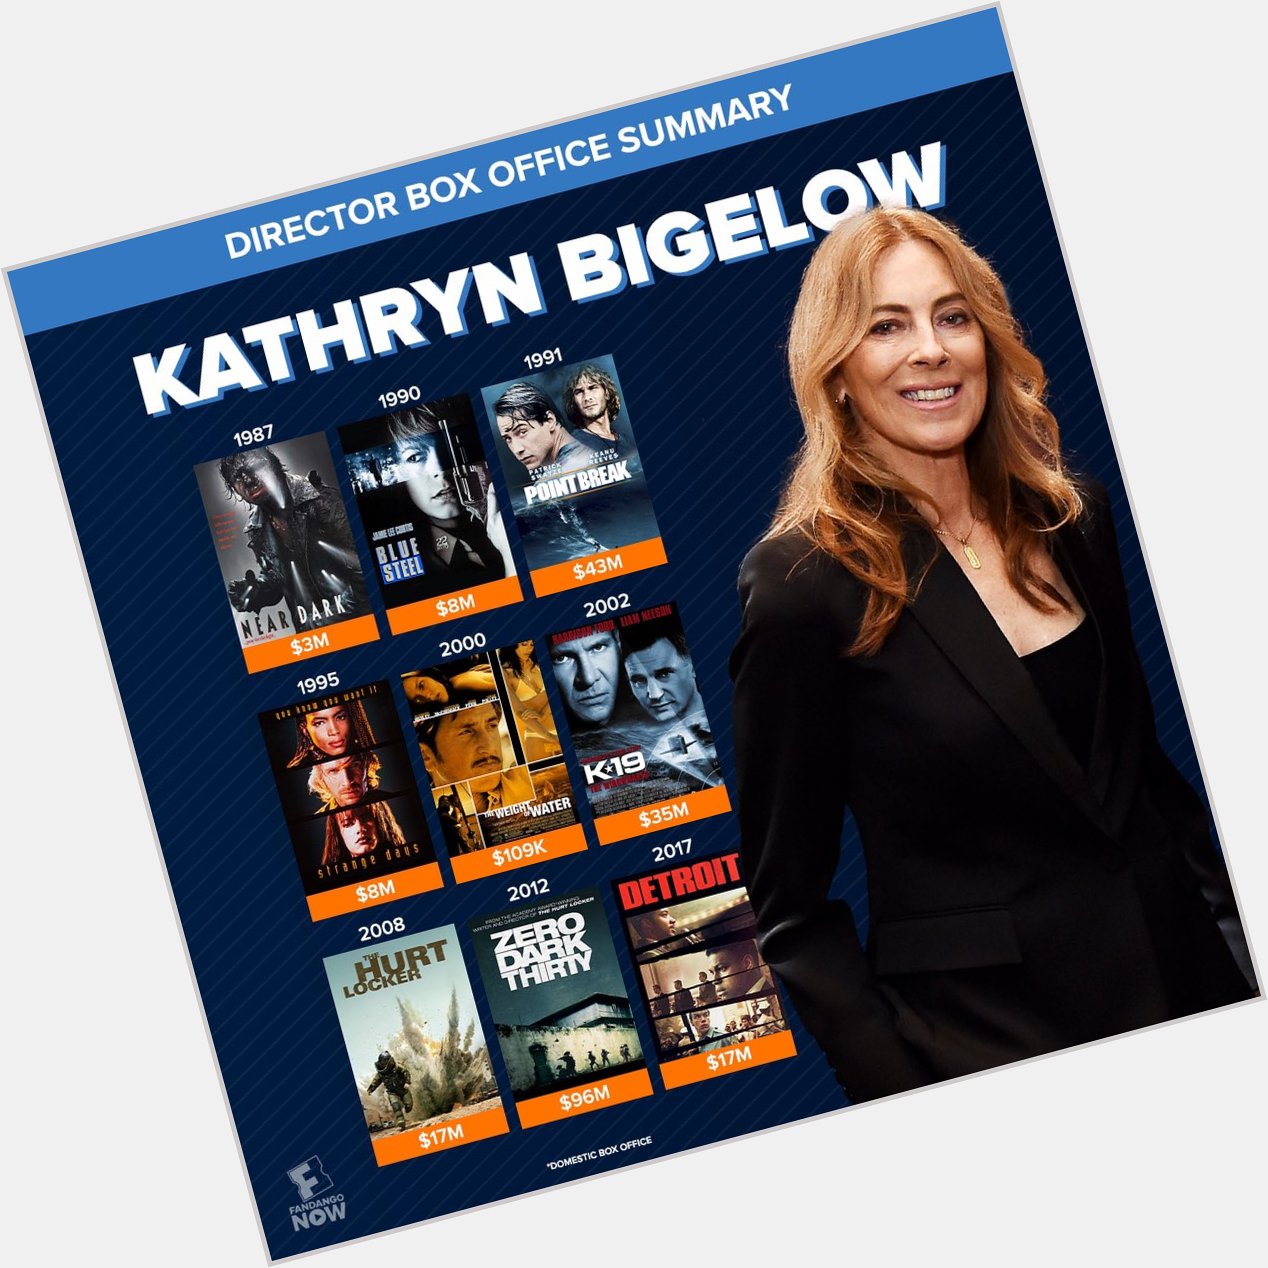 Happy birthday to the only woman (so far) to win Best Director. What s your favorite Kathryn Bigelow film? 